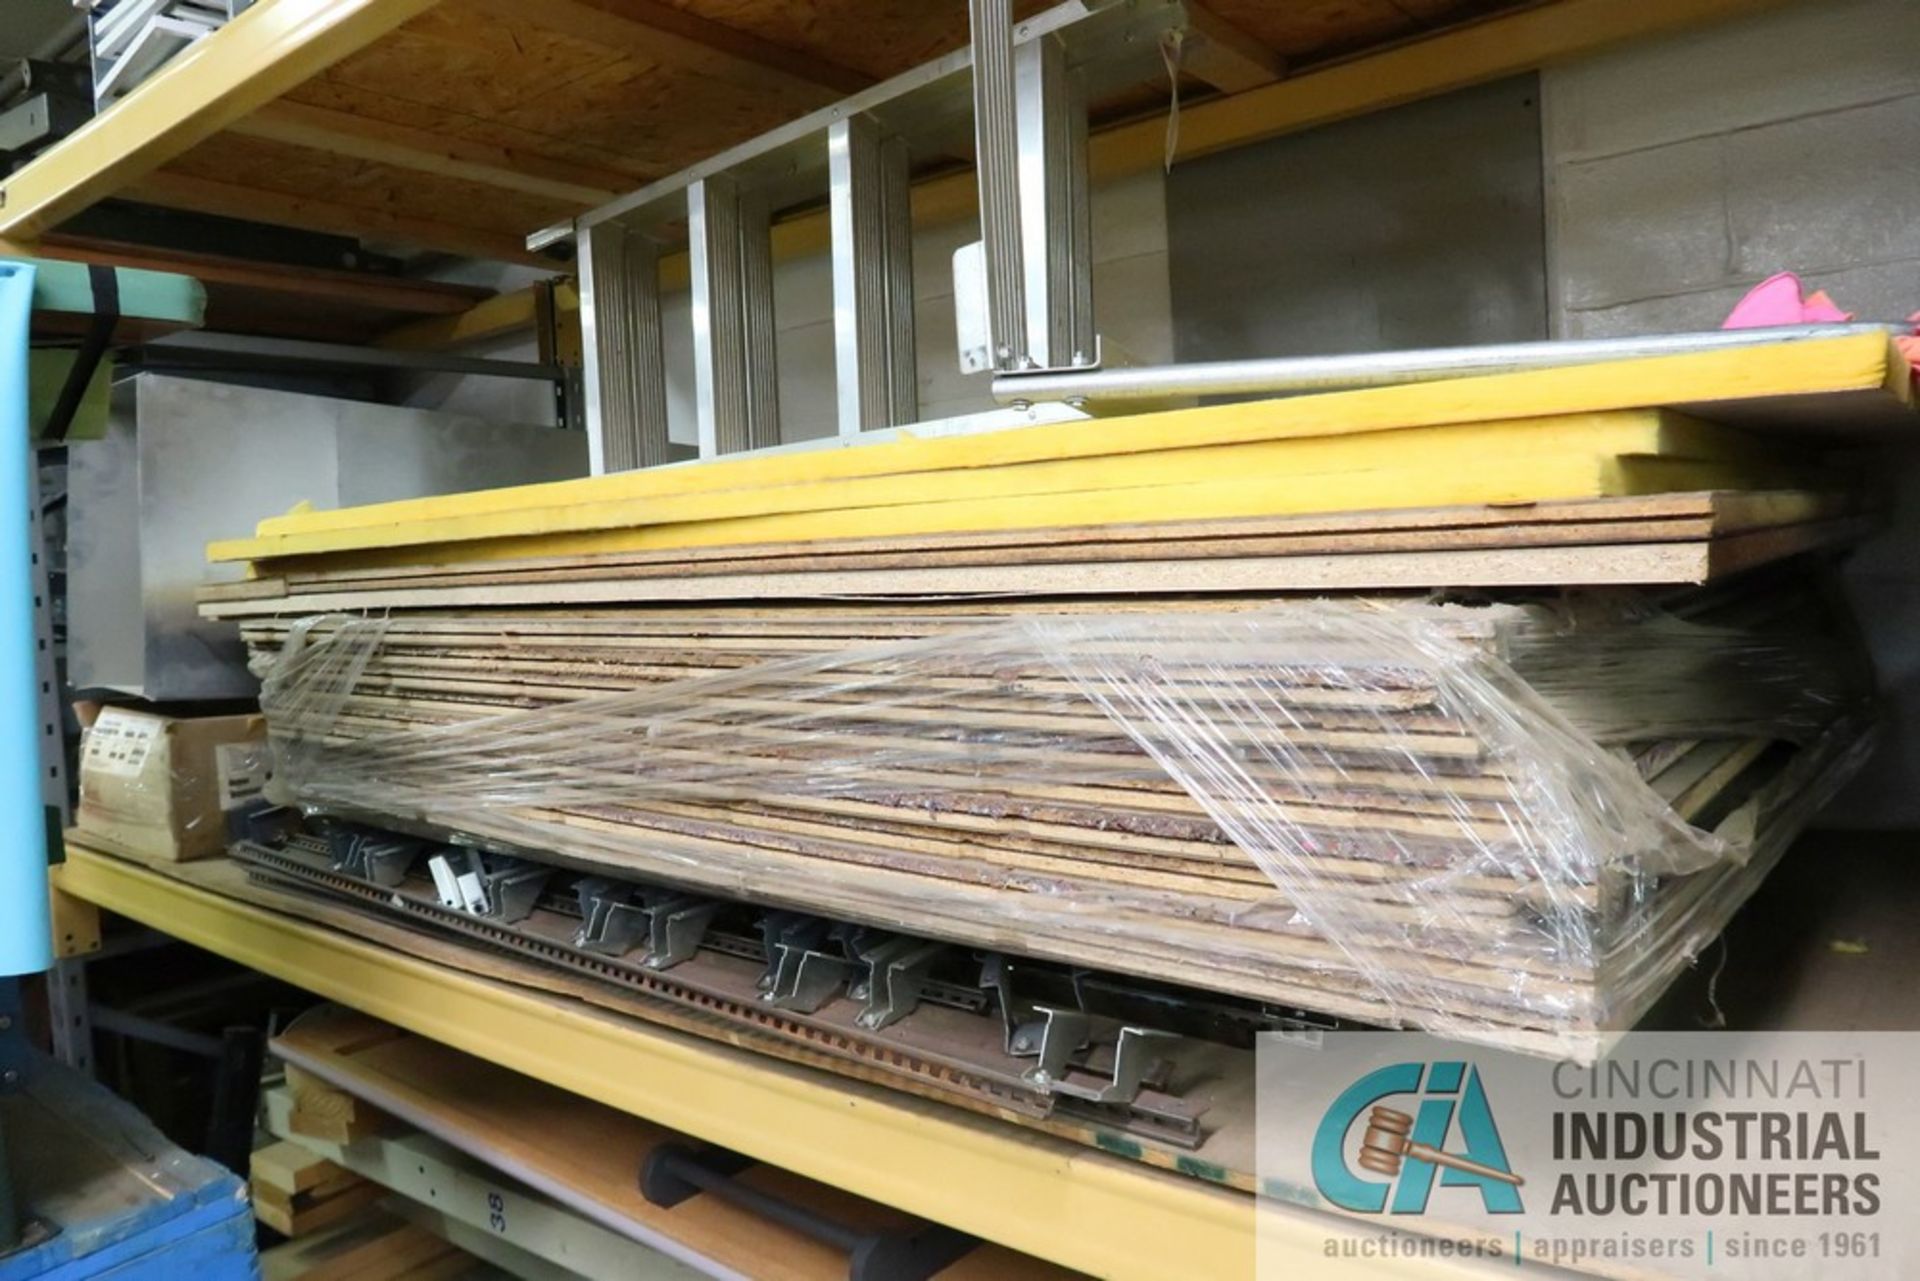 SECTIONS 108" X 48" X 106" ADJUSTABLE BEAM PALLET RACKS WITH CONTENTS INCLUDING GERBER MOVER FRAMES, - Image 5 of 12